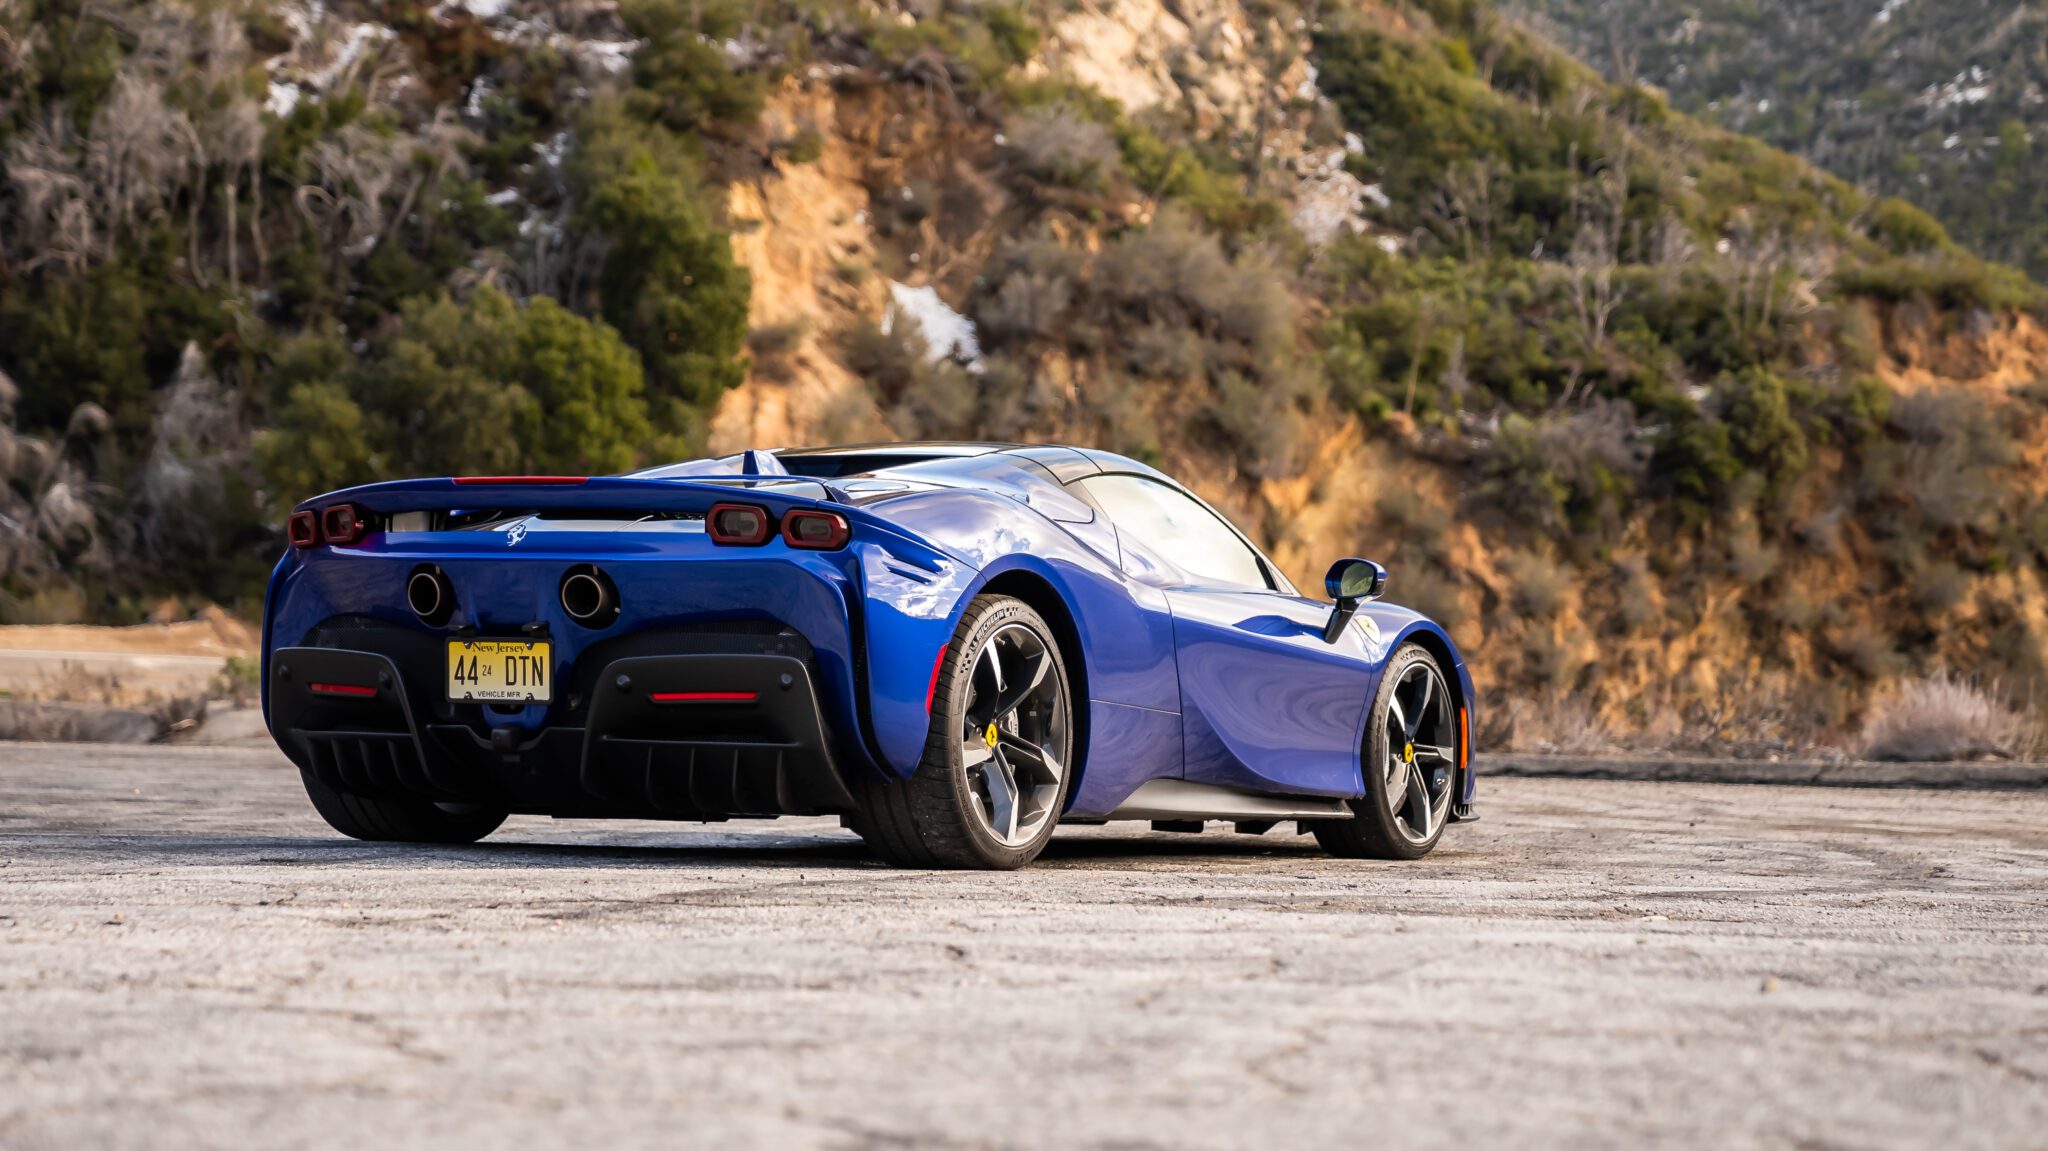 An image of a blue Ferrari SF90 Spider parked outdoors.